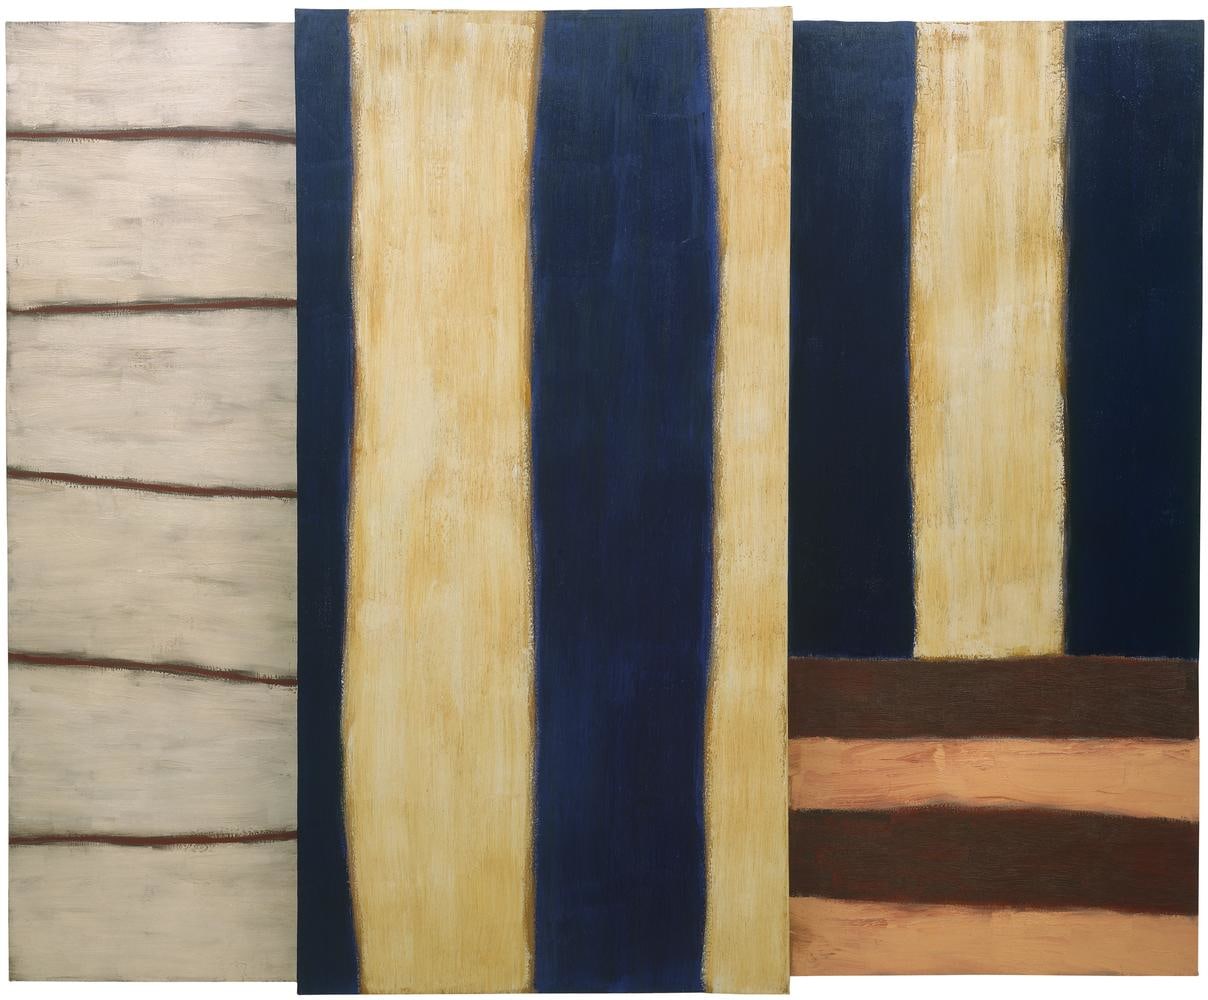 Sean Scully&amp;nbsp;

No Neo

1984

oil on linen

96 x 120 inches (243.8 x 304.8 cm)